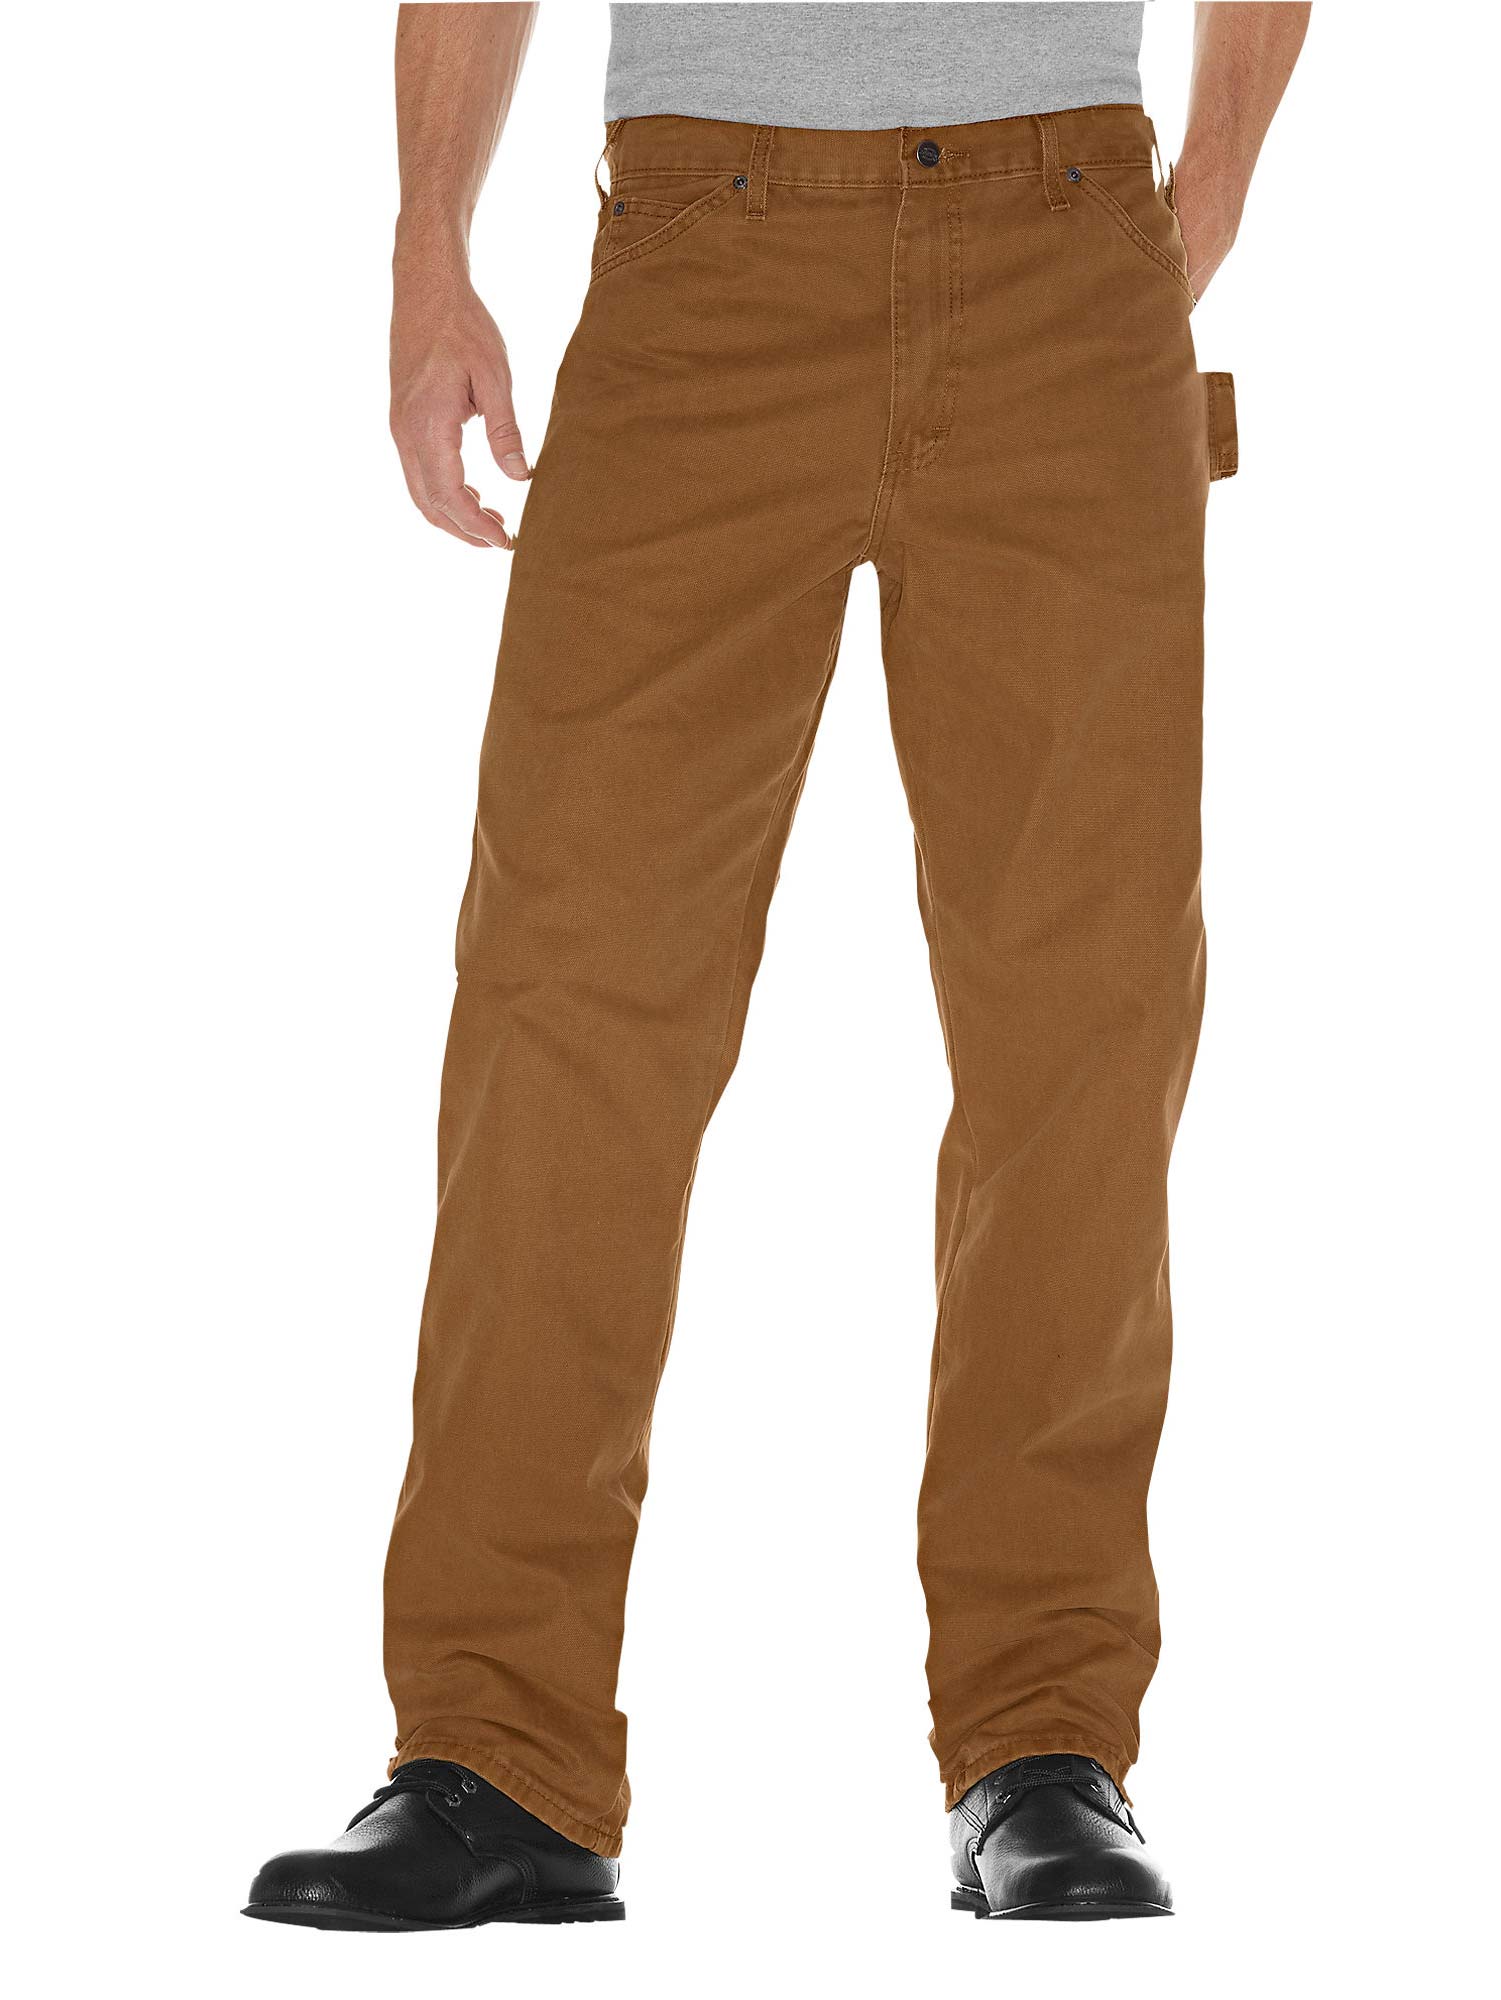 Dickies Relaxed Fit Sanded Duck Carpenter Pant - DU336